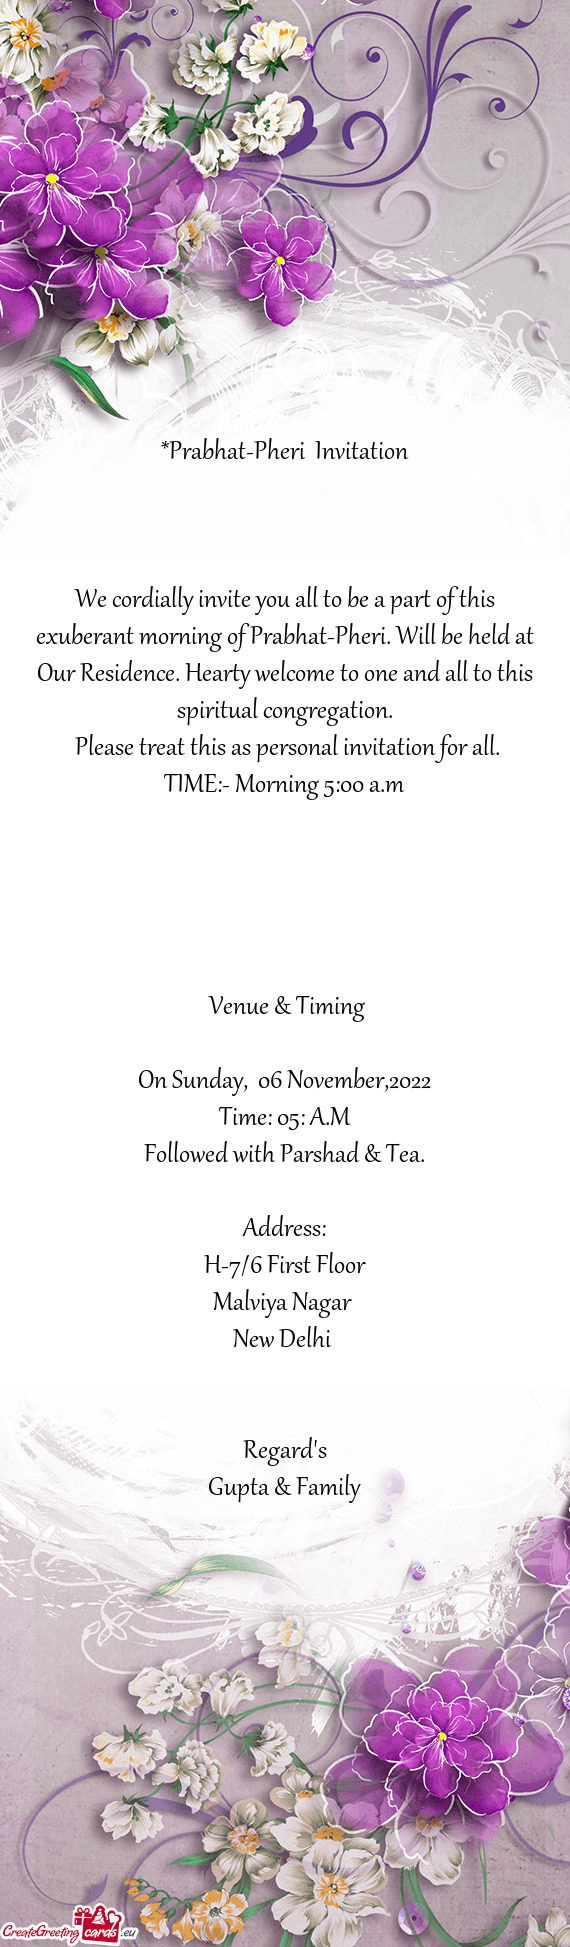 We cordially invite you all to be a part of this exuberant morning of Prabhat-Pheri. Will be held at